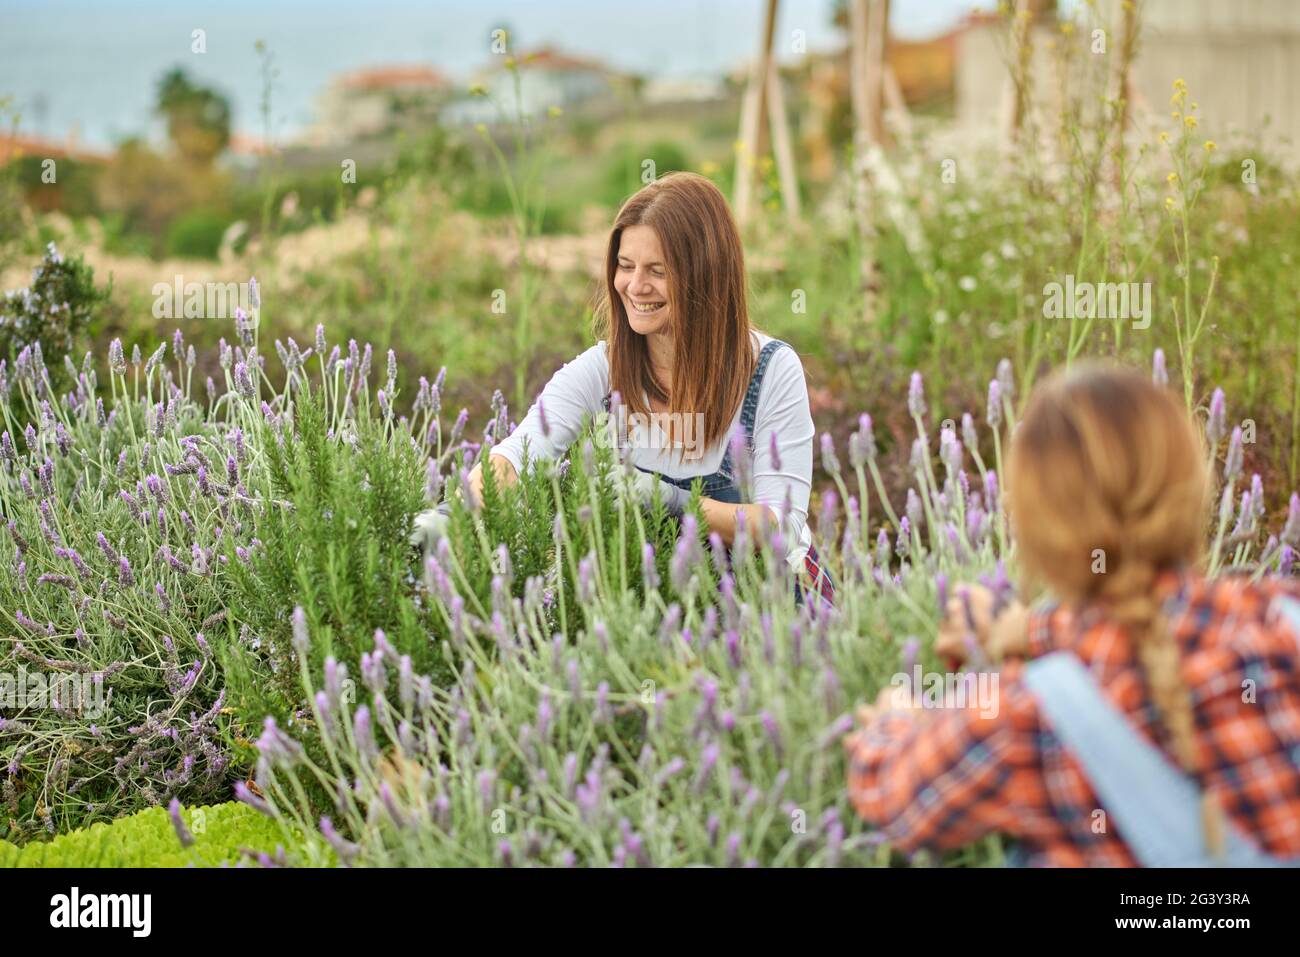 Unrecognizable flower farmers working on plantation with blooming lavender plants Stock Photo